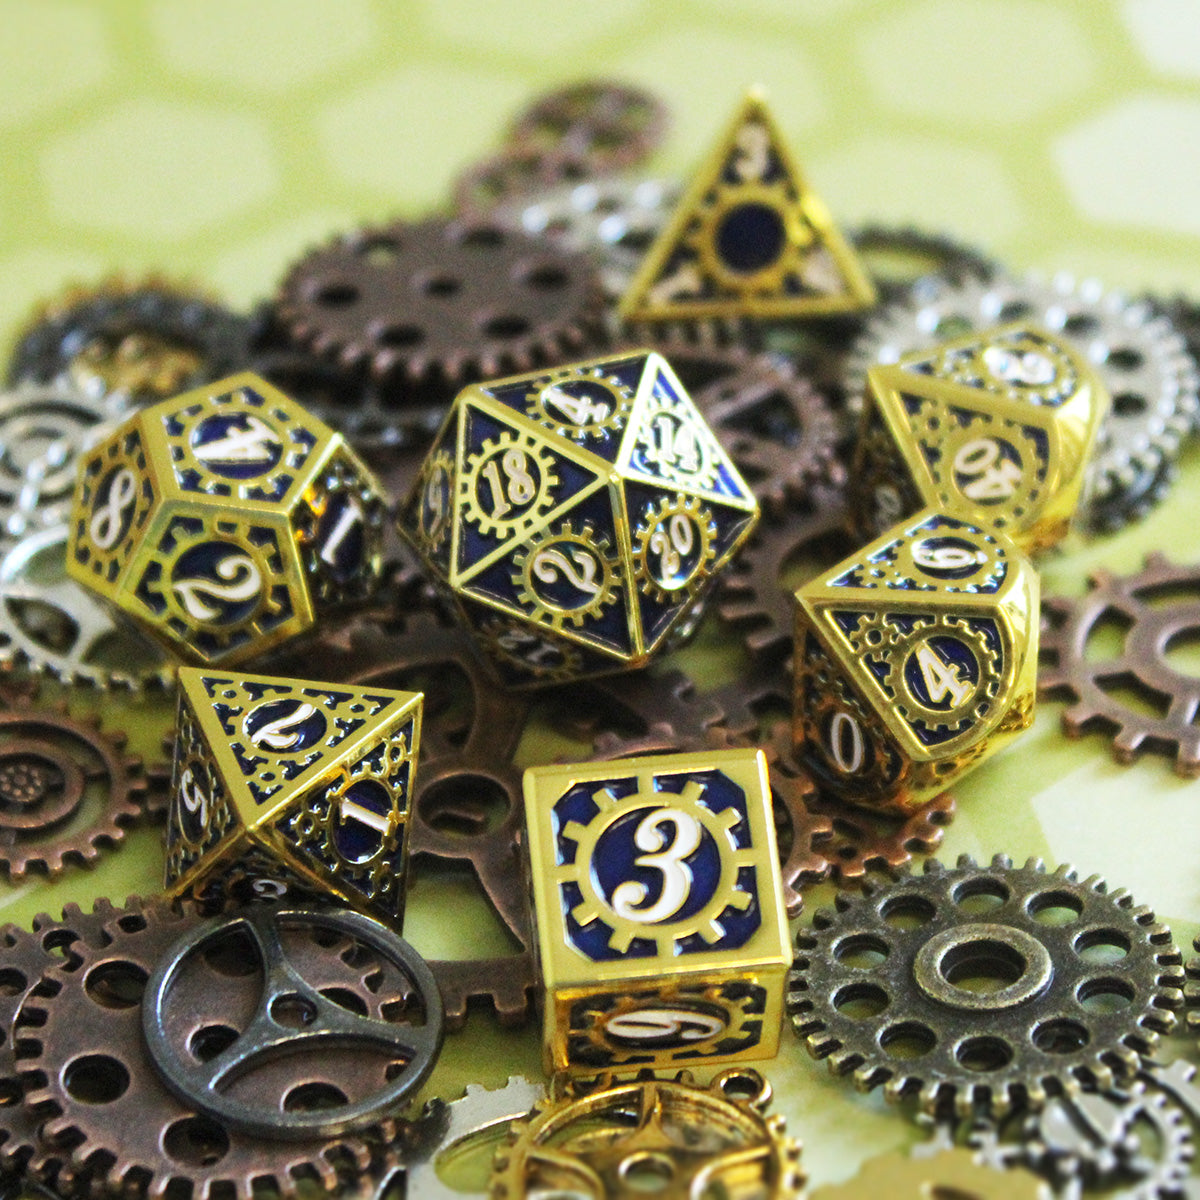 Gear style dice set inspired by dwarven tinkerers